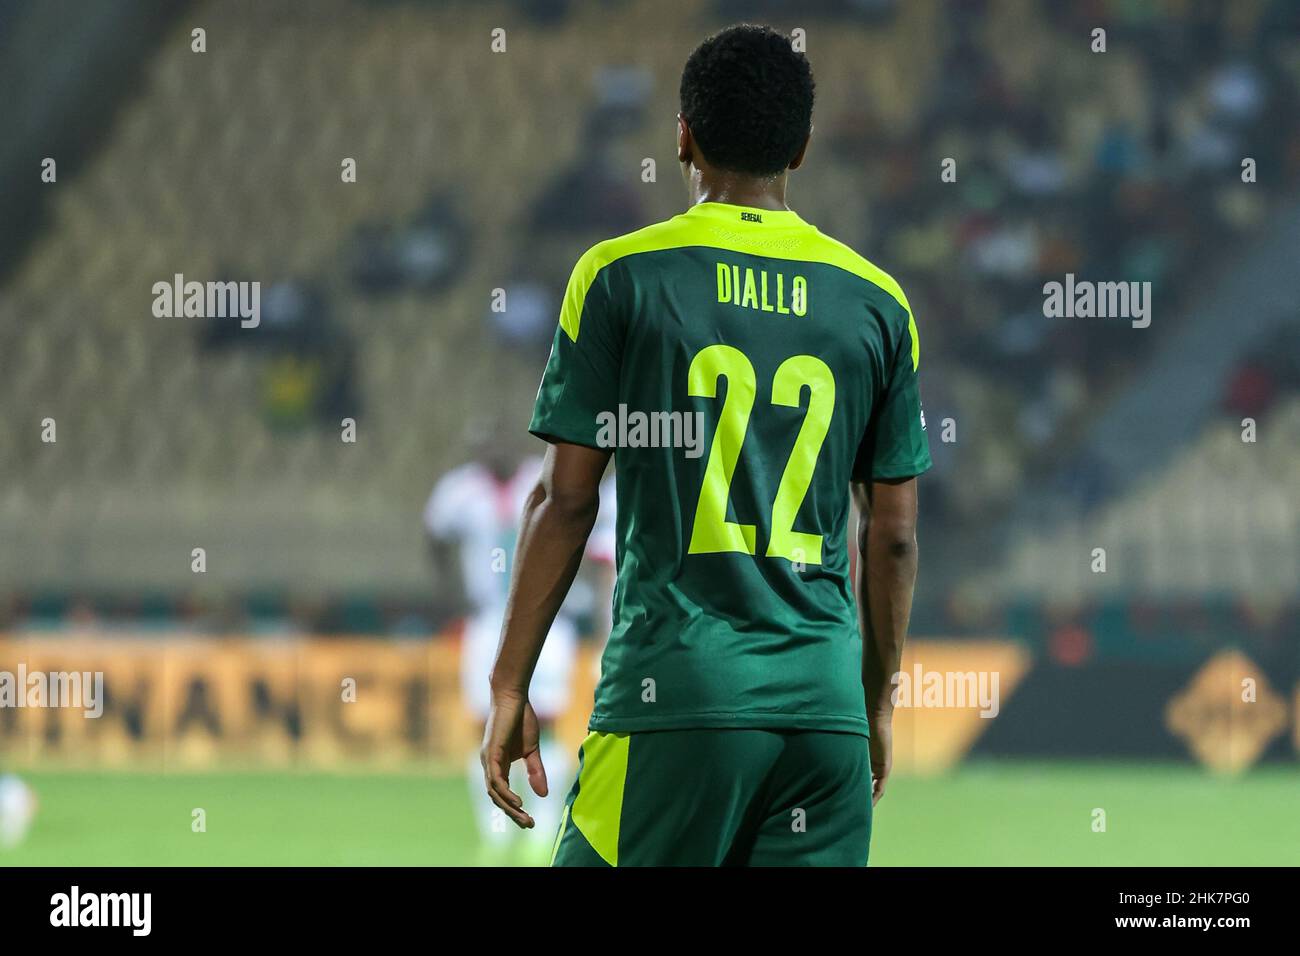 CAMEROON, Yaounde, 02 February 2022 - Abdou Diallo of Senegal during the Africa Cup of Nations play offs semi final match between Burkina Faso and Senegal at Stade Ahmadou Ahidjo,Yaounde, Cameroon, 02/02/2022/ Photo by SF Stock Photo